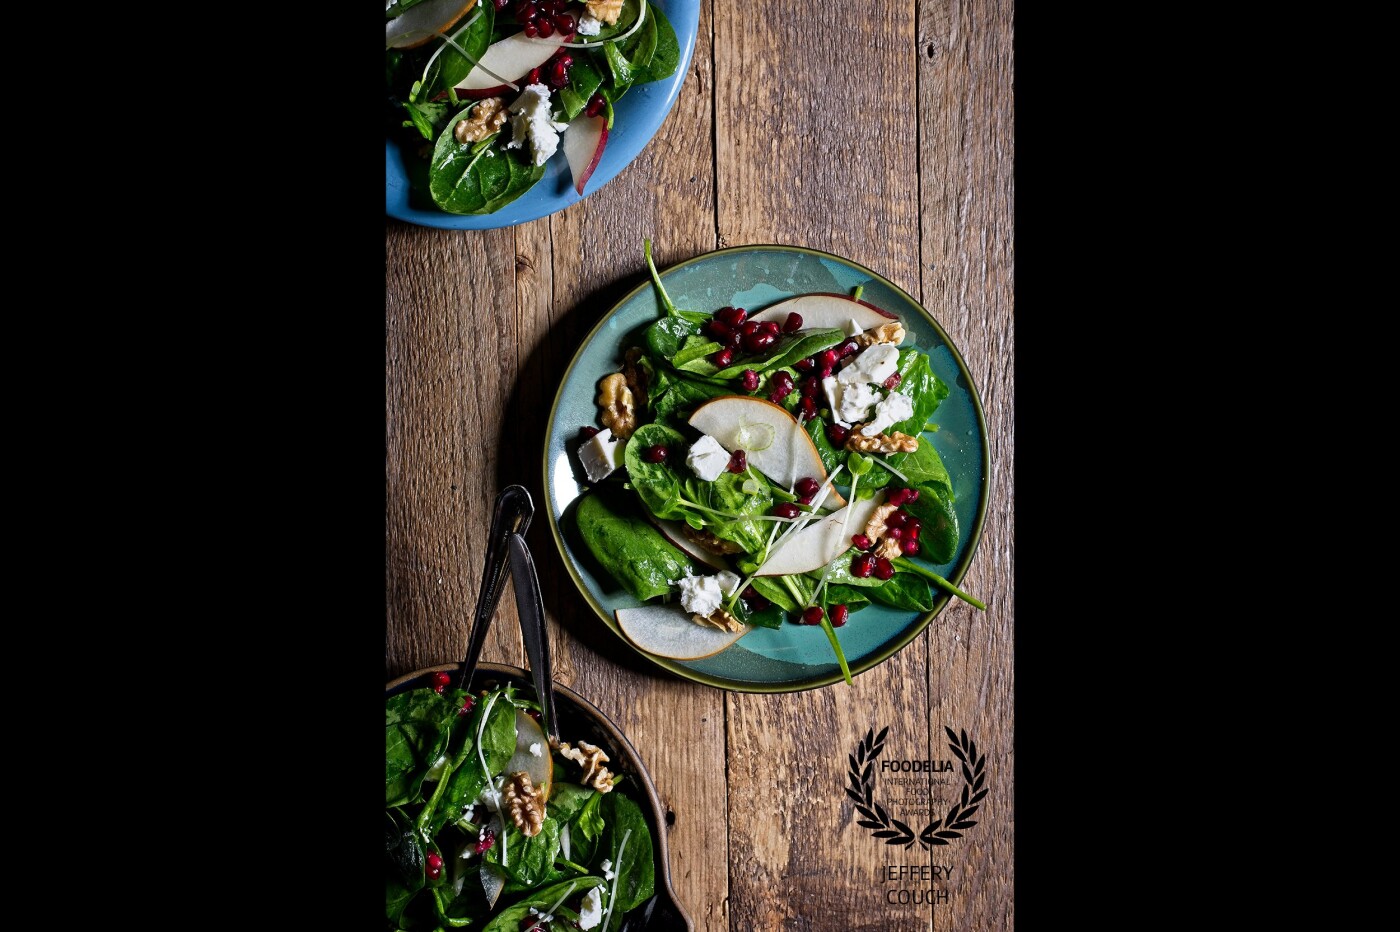 Spinach, pear and goat cheese salad, customer photo. Nikon D810, Alien Bee lights and Jeffcouchfood made background. Thank you for the recognition.